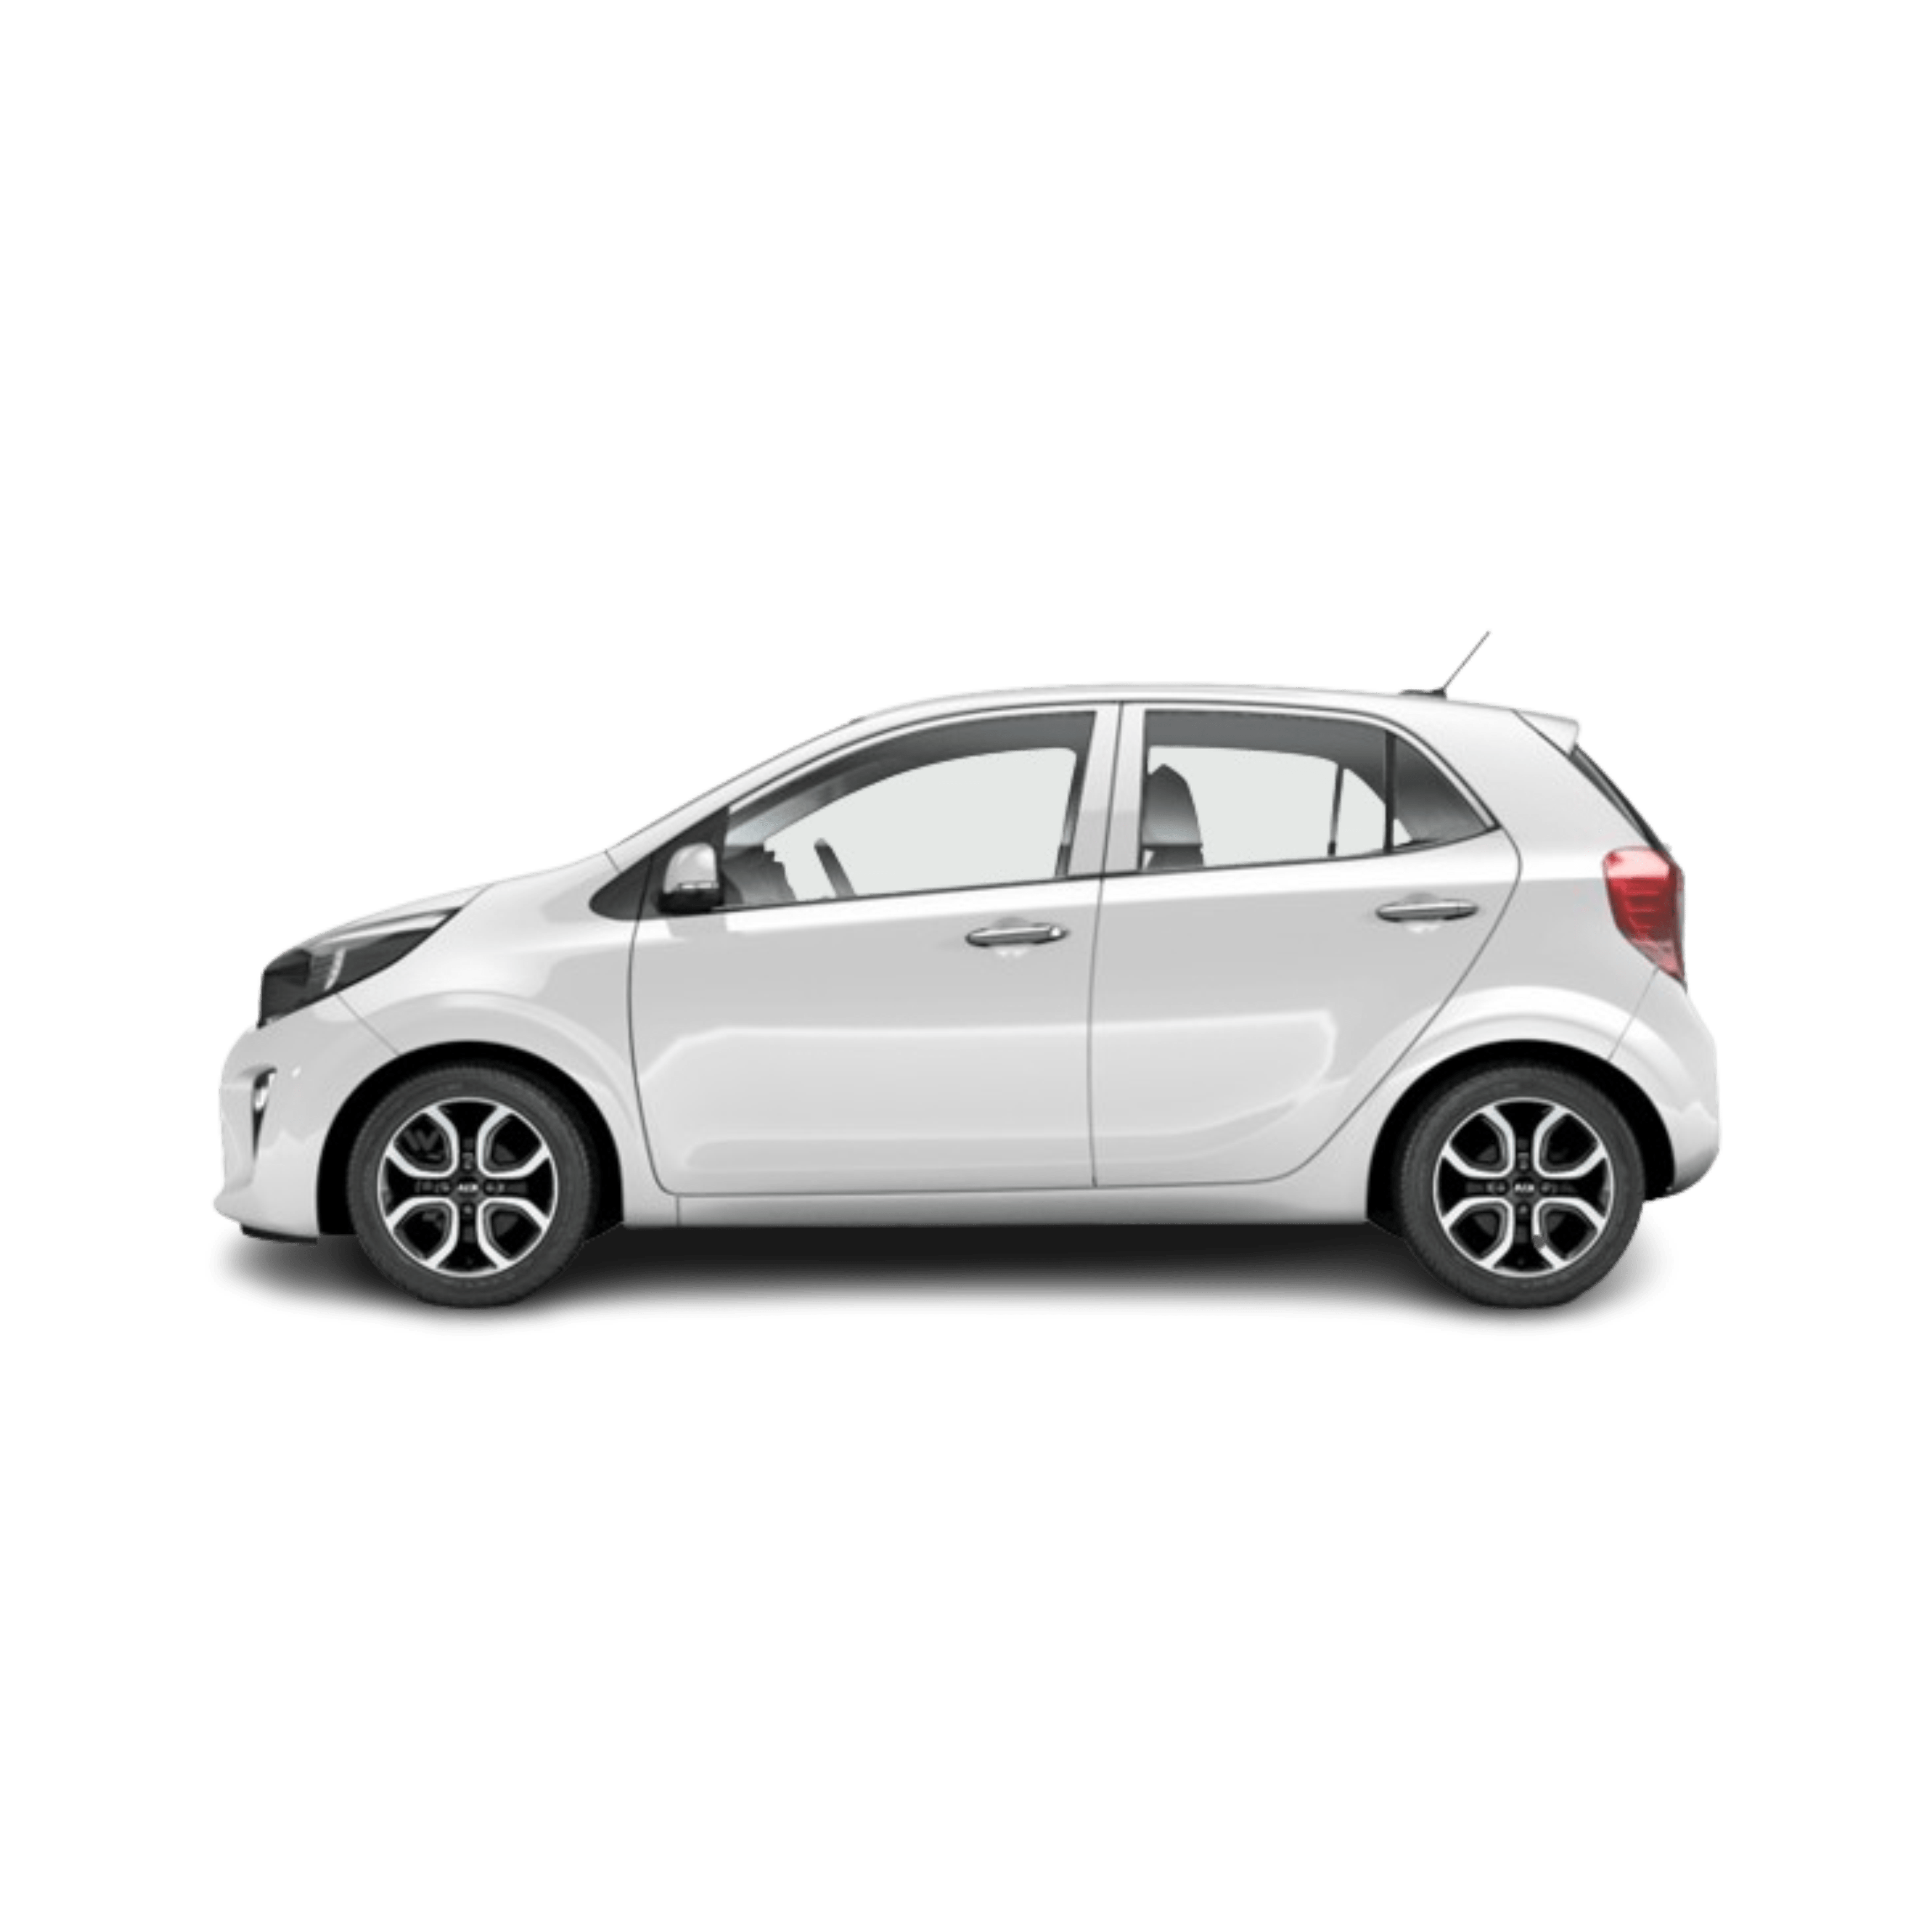 Budget Friendly Cars: Affordable Options for Every Need